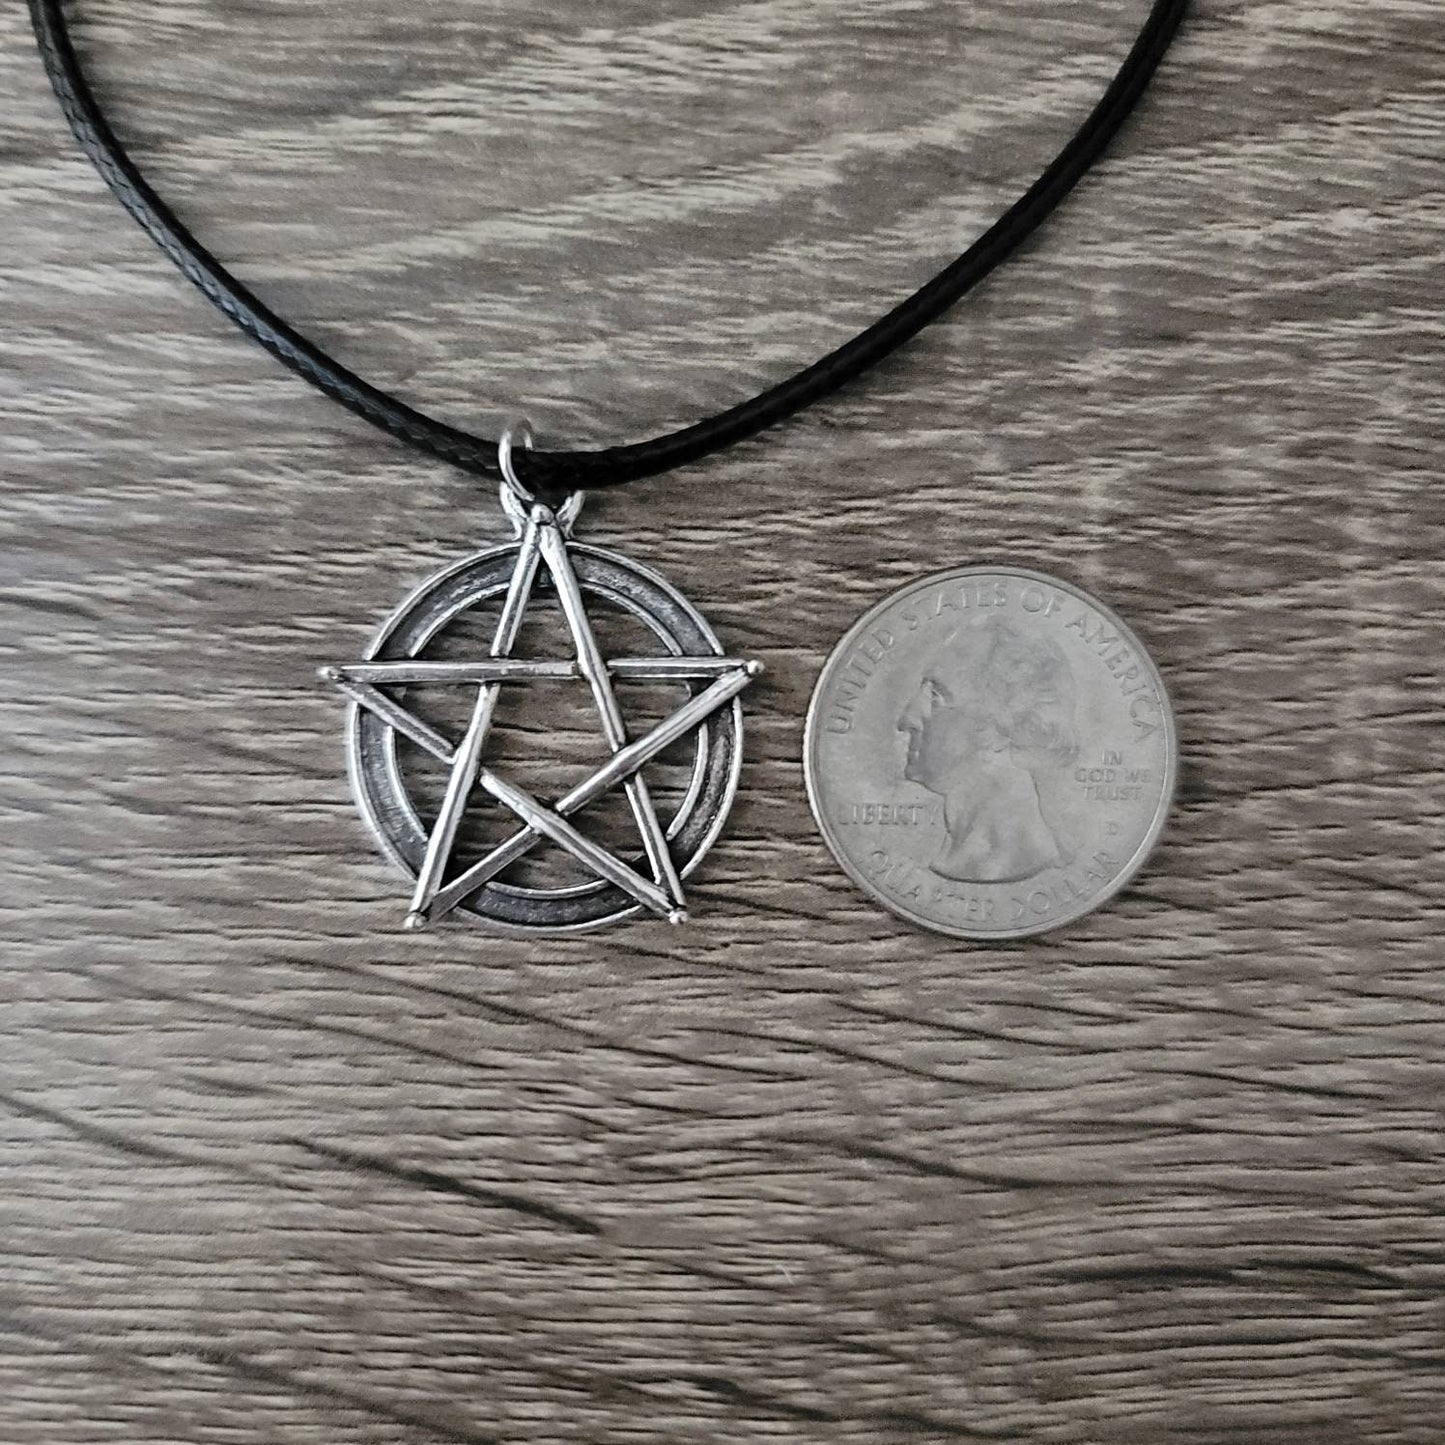 Pentacle Necklace - Minimalistic pentagram pendant on an adjustable 18 inch black cord - Pagan Jewelry, Amulets & Charms - Wiccan Gifts